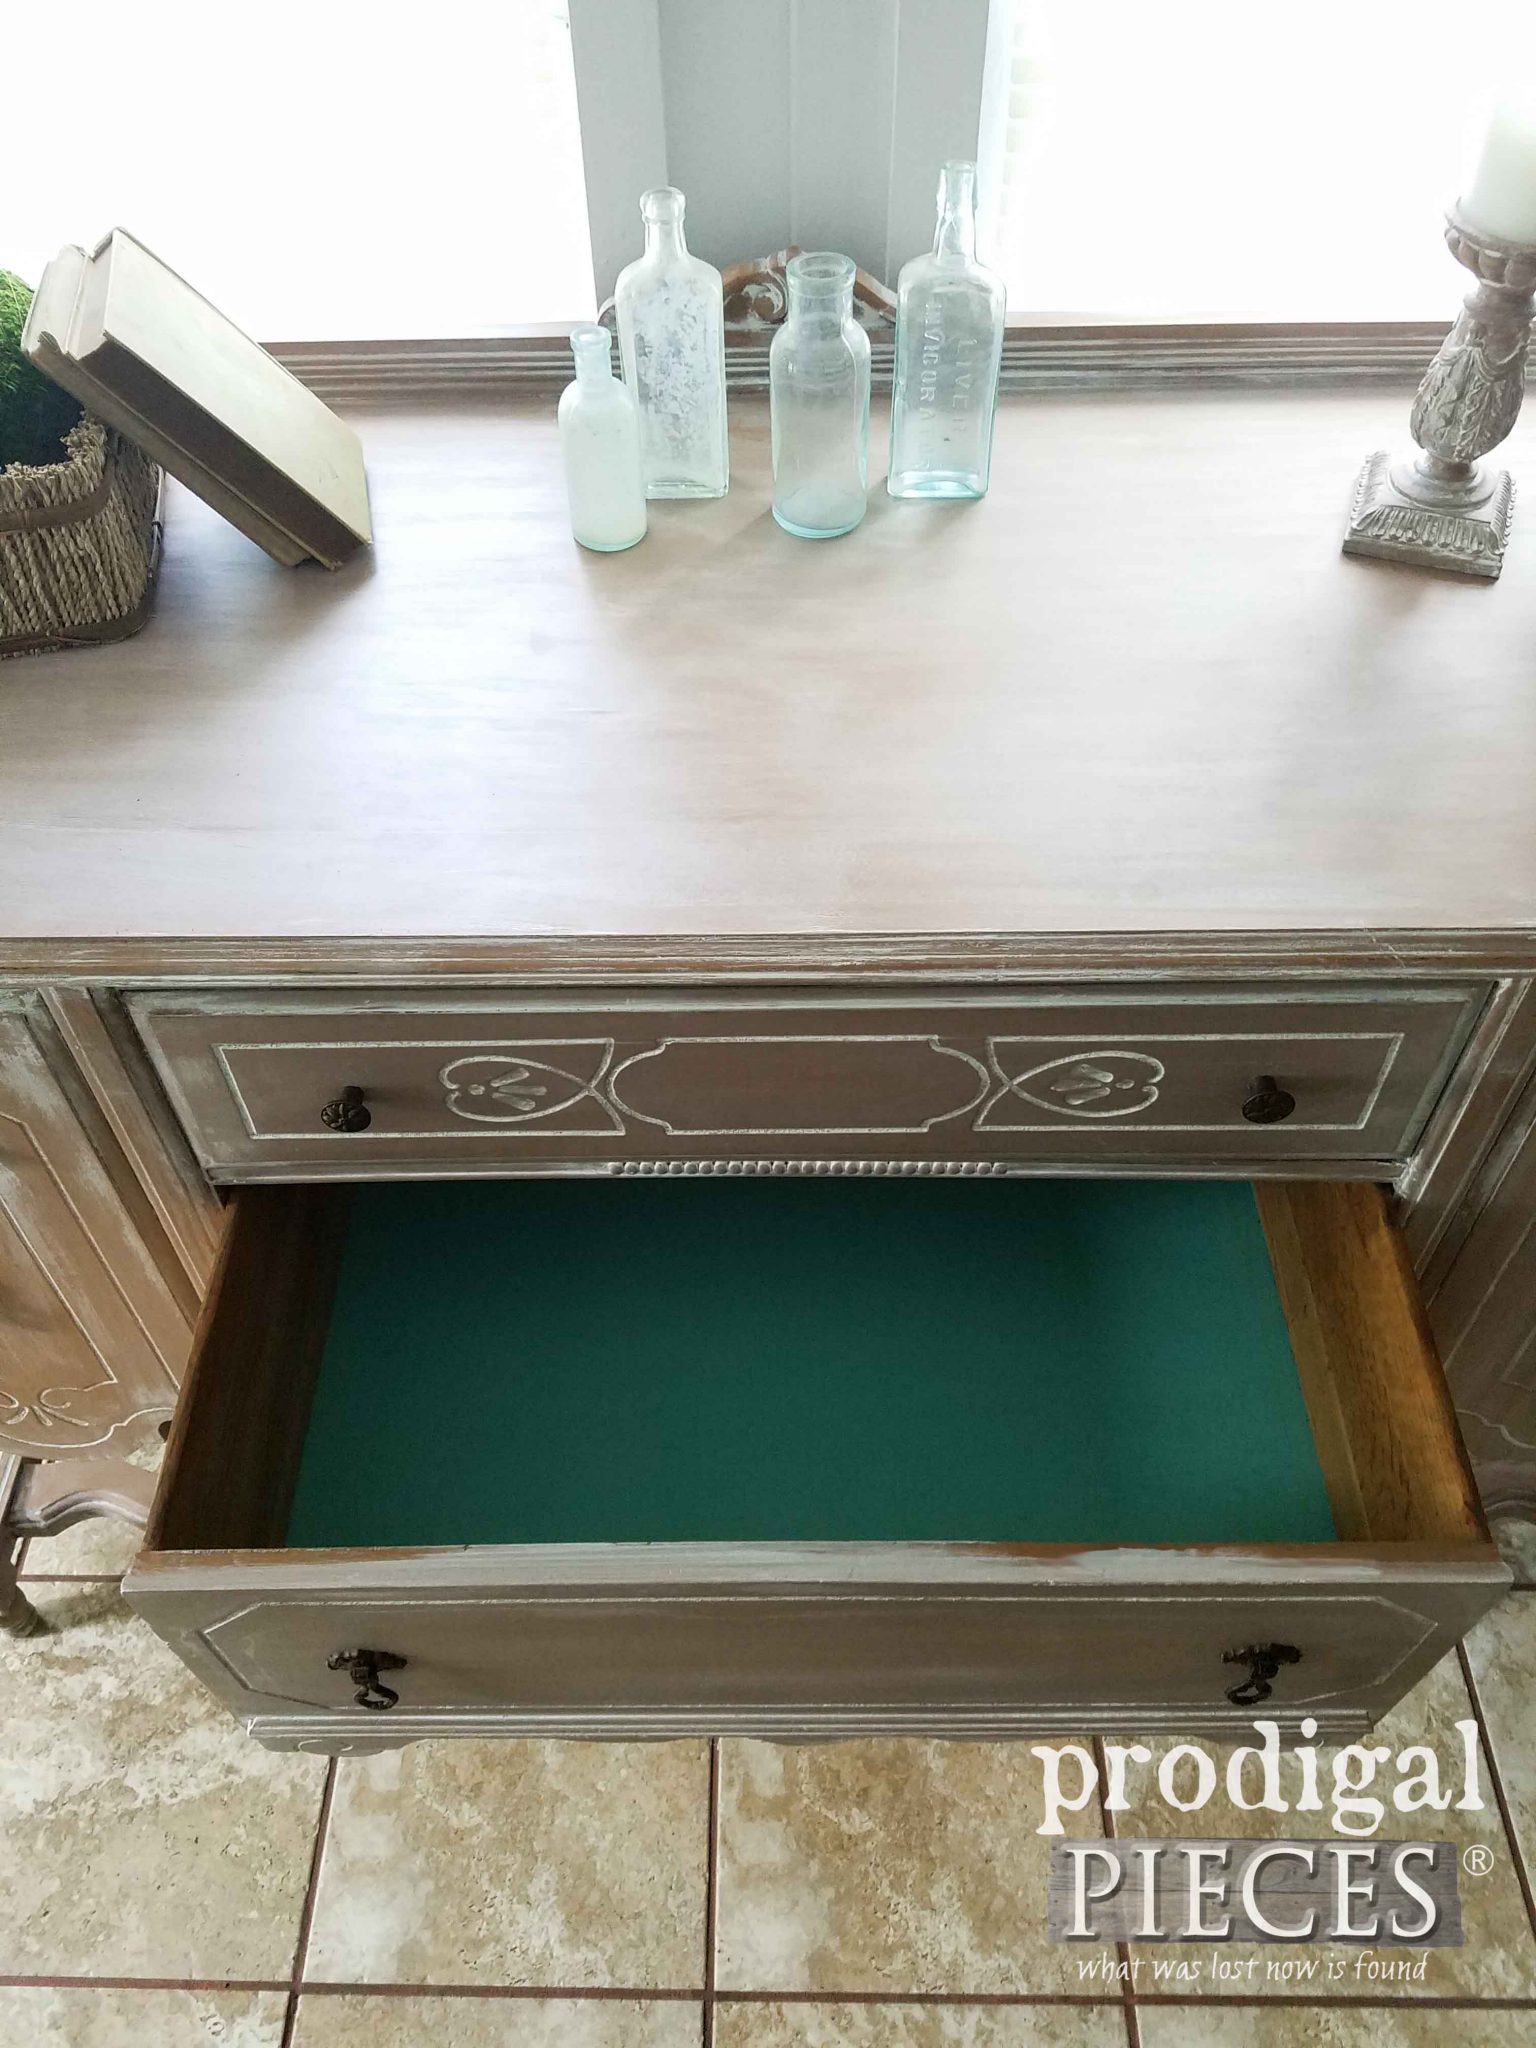 Teal Colored Drawers in Antique Buffet by Prodigal Pieces | prodigalpieces.com